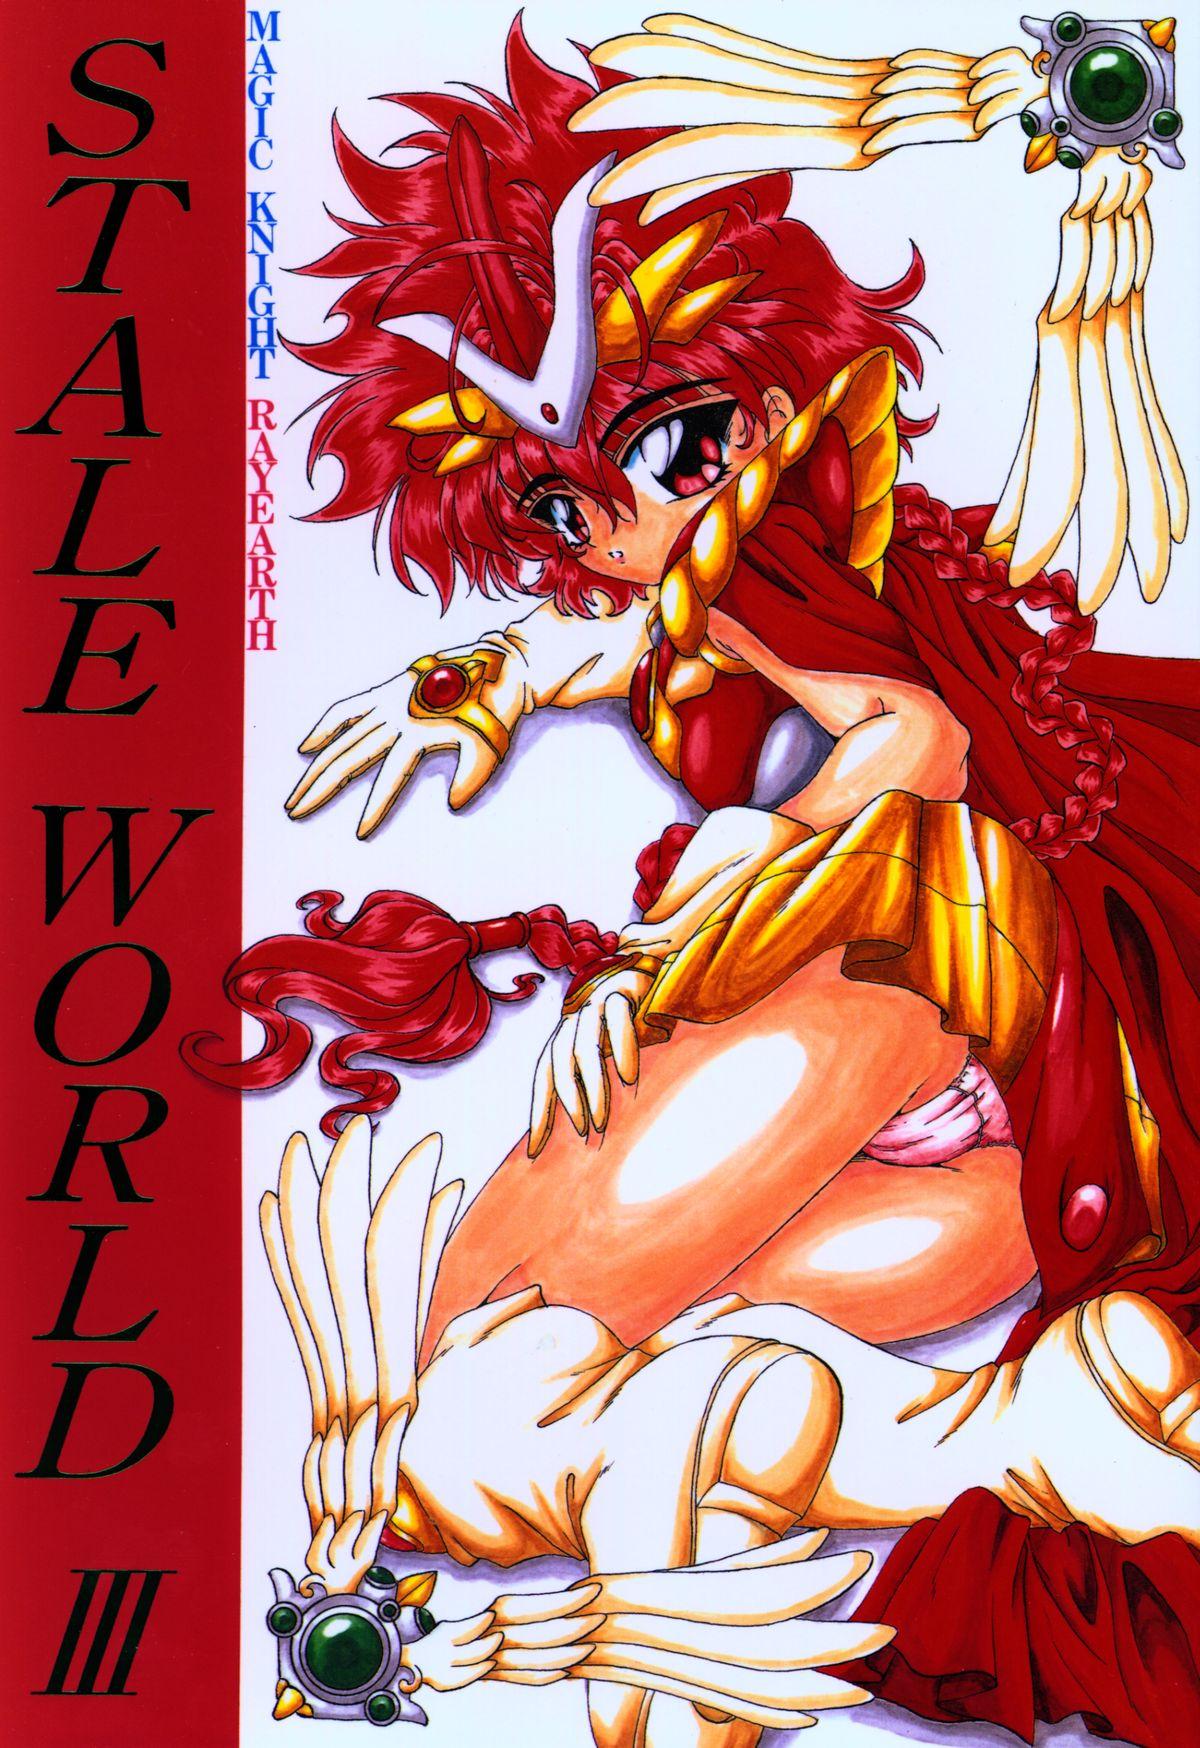 Homosexual Stale World III - Magic knight rayearth Dancing - Picture 1